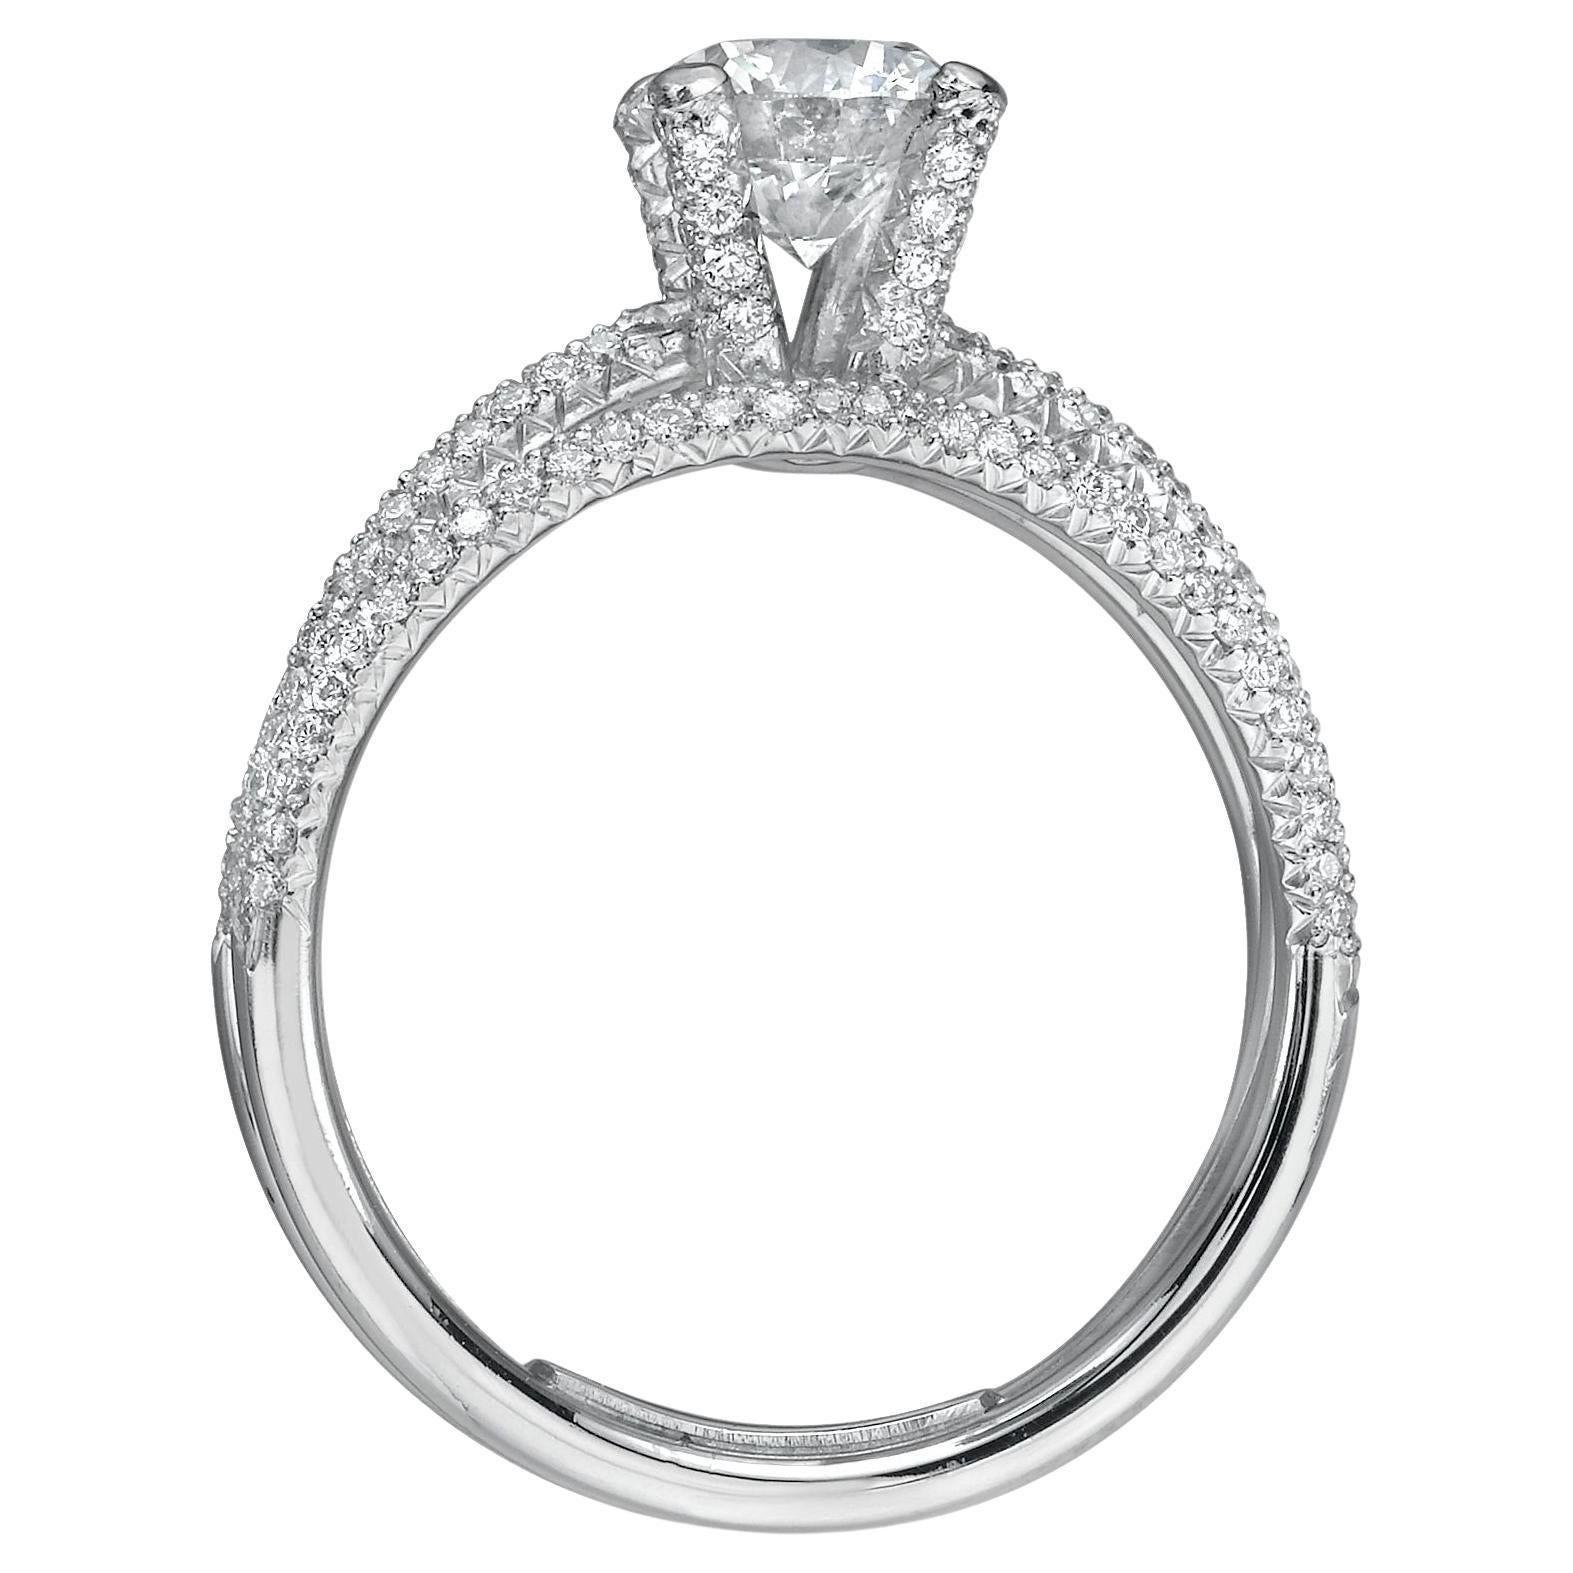 This stunning engagement ring exudes elegance and timelessness. Crafted from premium Platinum, the triple band mounting glistens with 0.40 CTs of shimmering white diamonds, highlighting the central 0.90 CT diamond with HSI1 clarity. The ring's